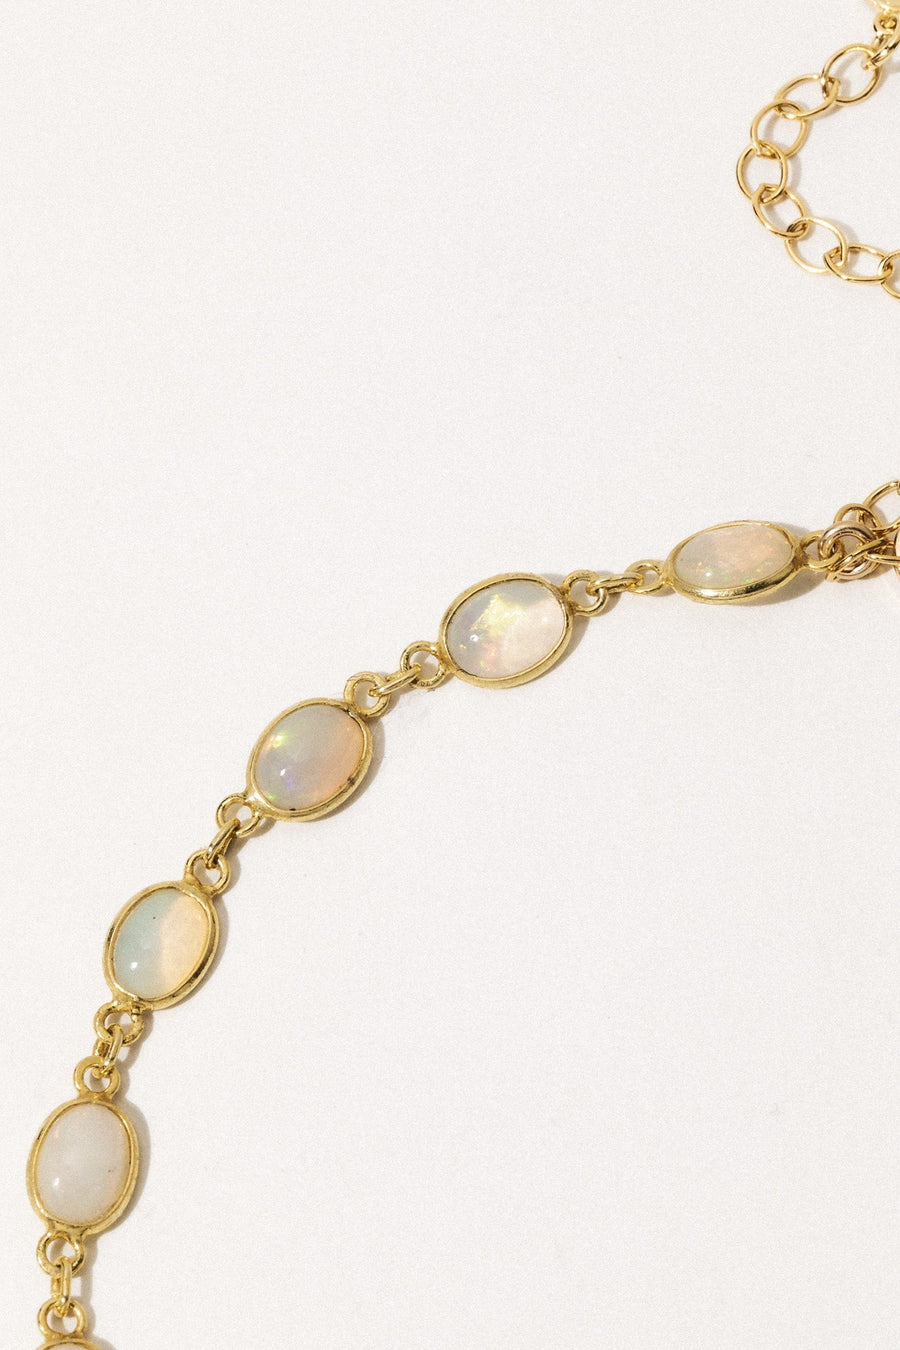 Starborn Creations Jewelry Gold / 12 inches Olivia Opal Choker